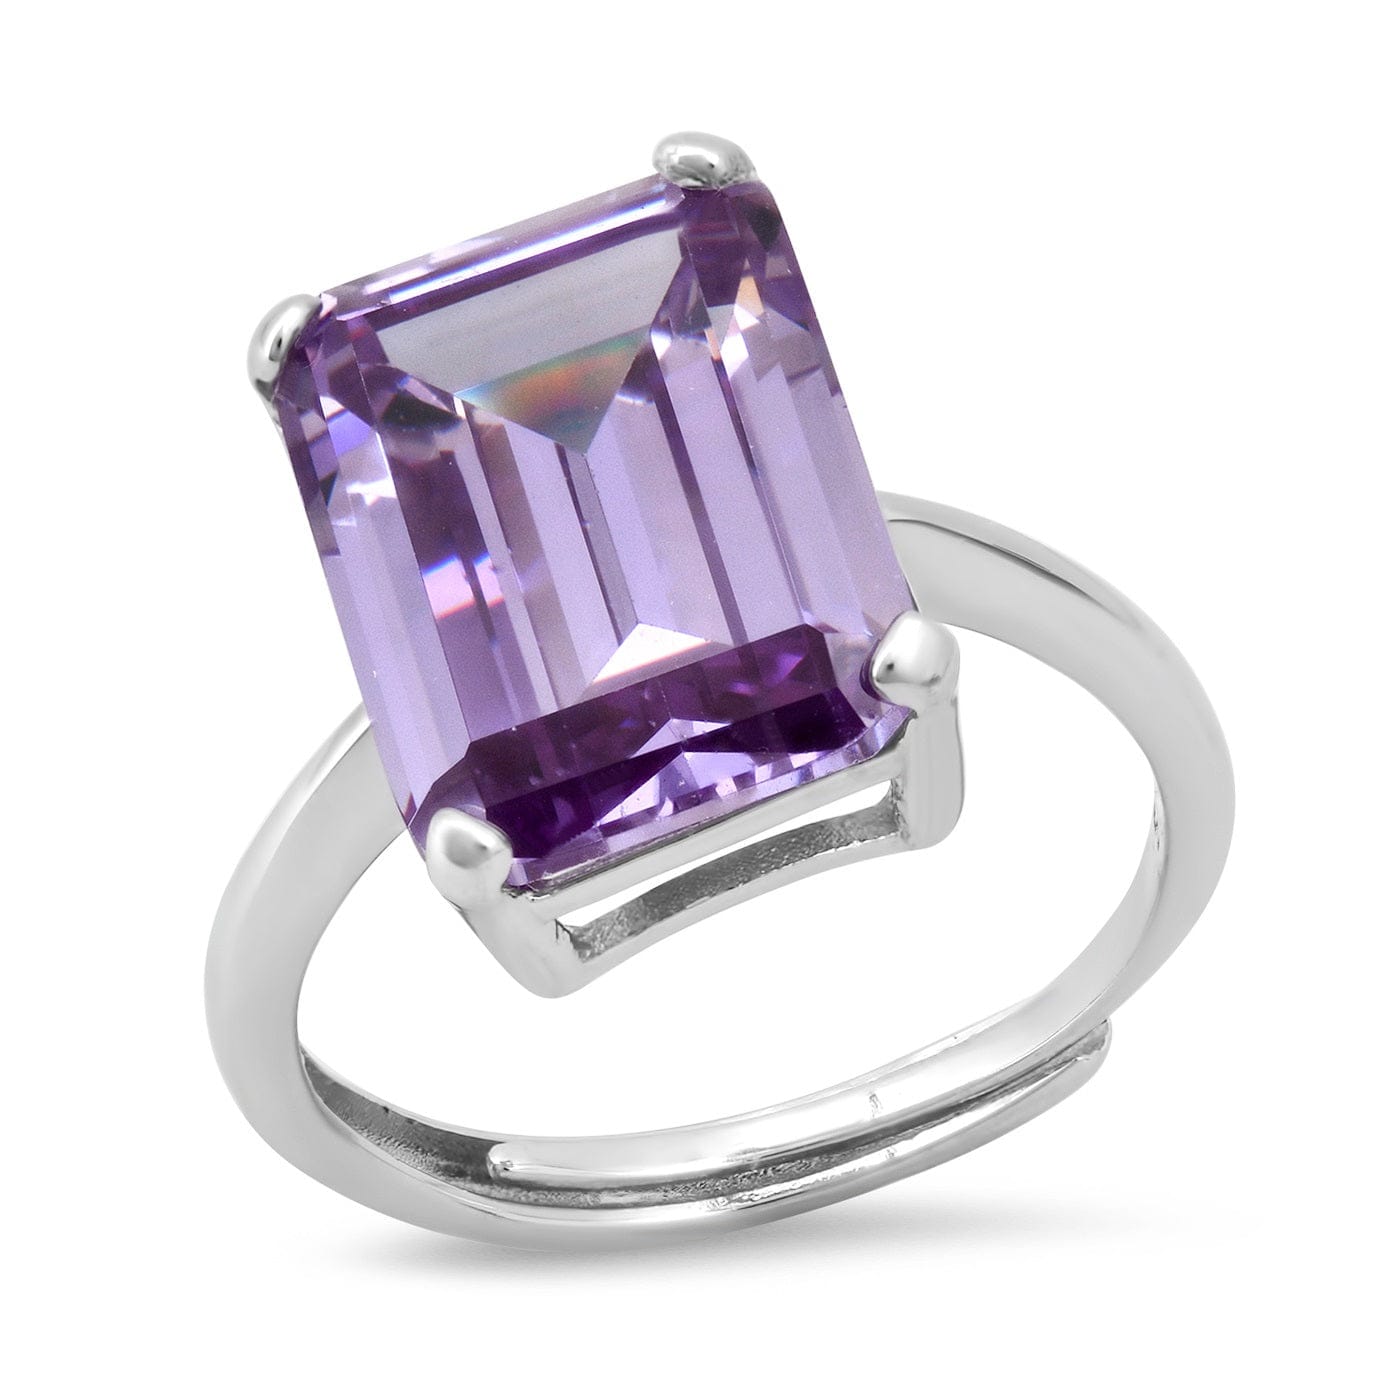 TAI JEWELRY Rings Sterling Silver/Lavender Emerald Cut Solitaire Ring